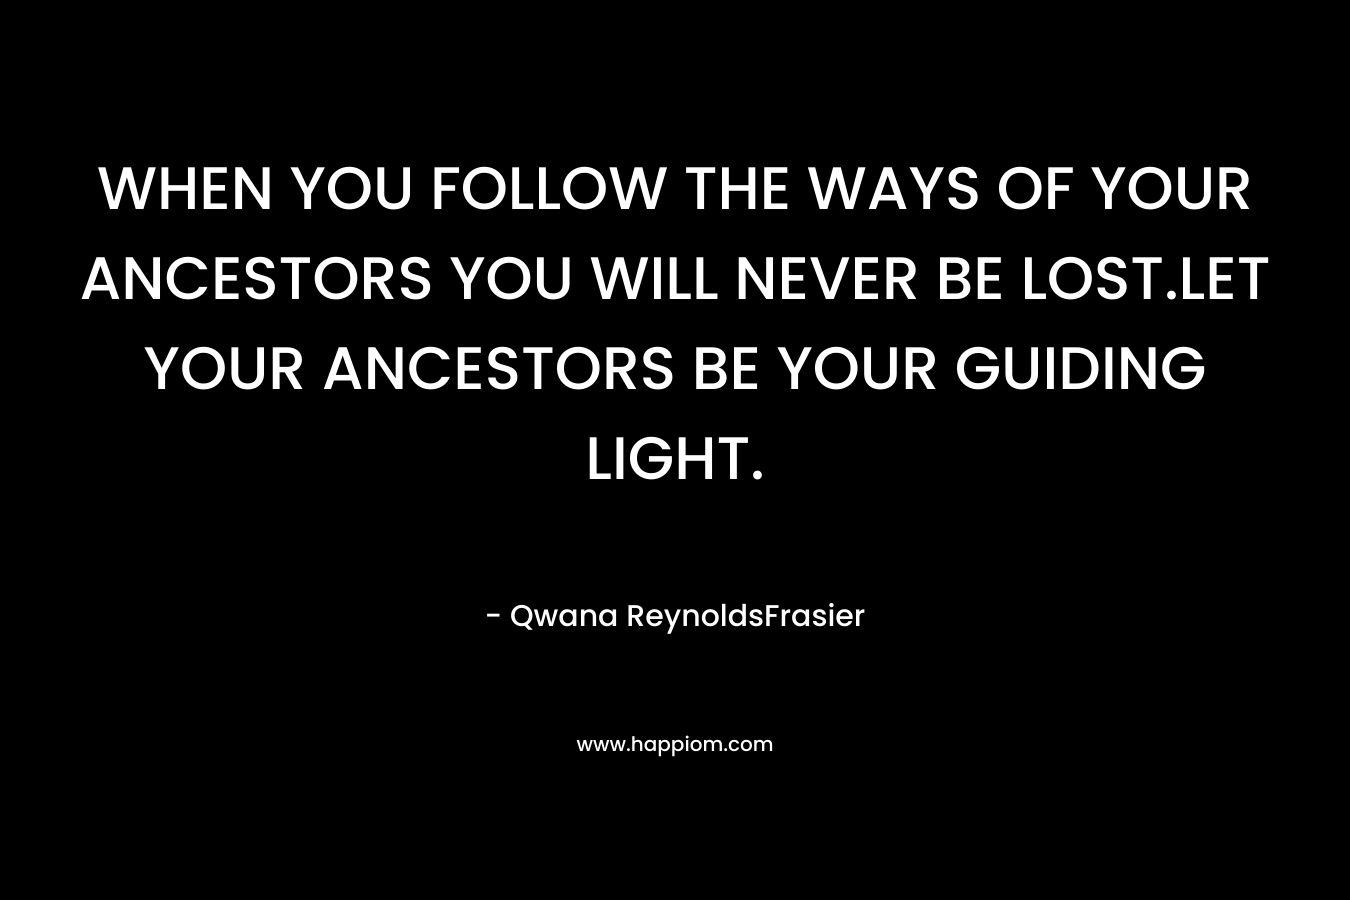 WHEN YOU FOLLOW THE WAYS OF YOUR ANCESTORS YOU WILL NEVER BE LOST.LET YOUR ANCESTORS BE YOUR GUIDING LIGHT. – Qwana ReynoldsFrasier